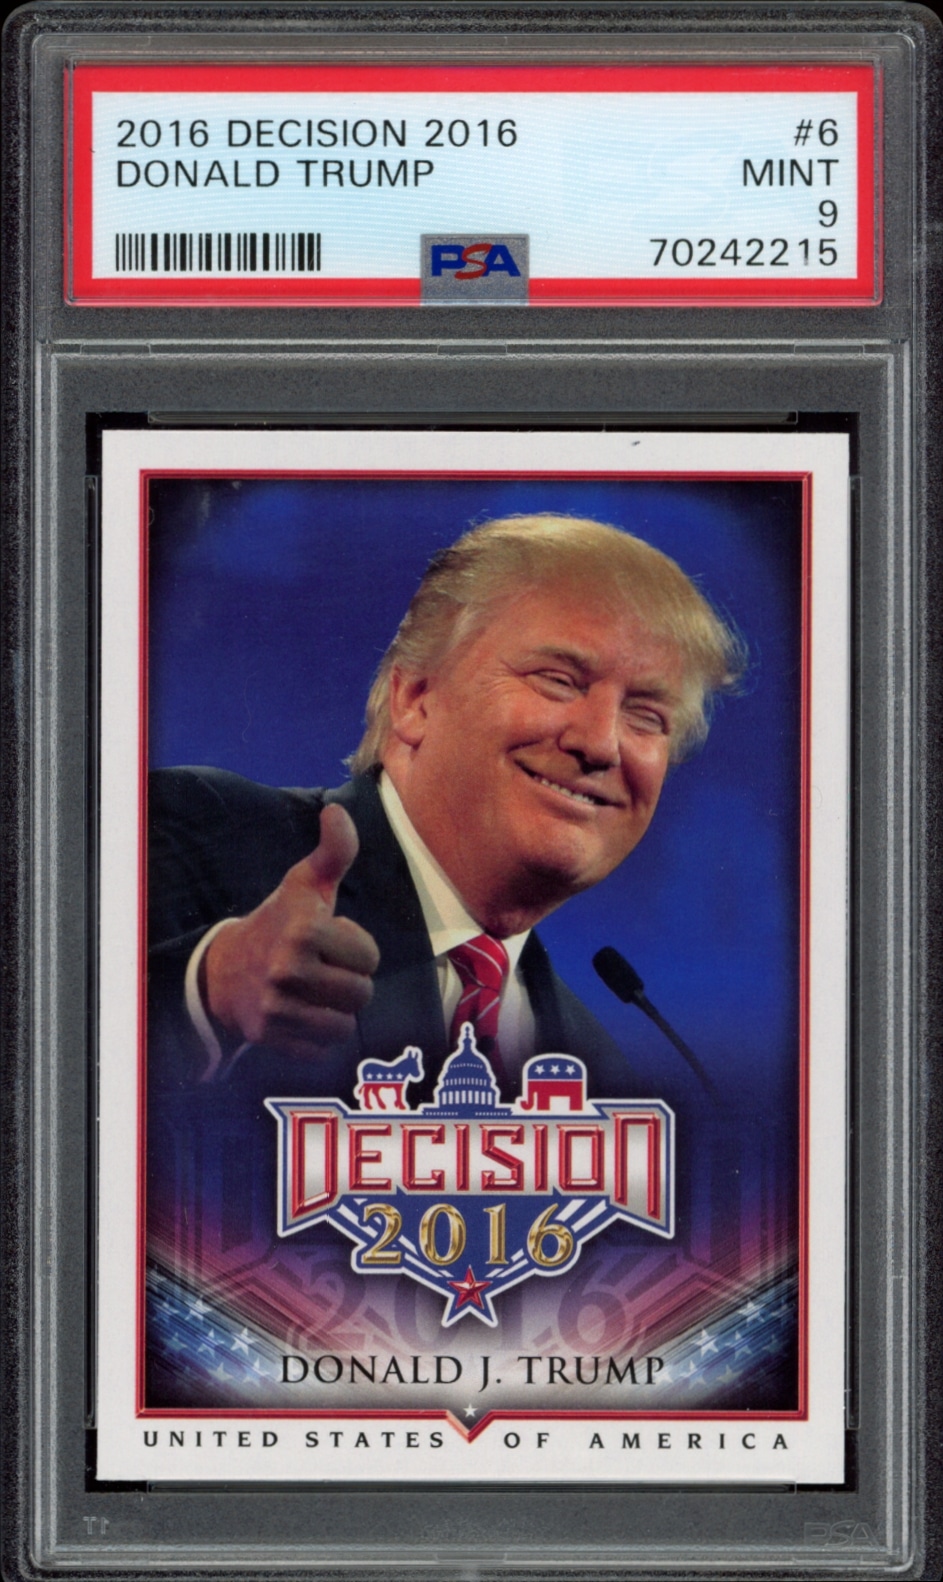 2016 Decision collectible card featuring a Mint 9 rated Donald Trump, authenticated by PSA.